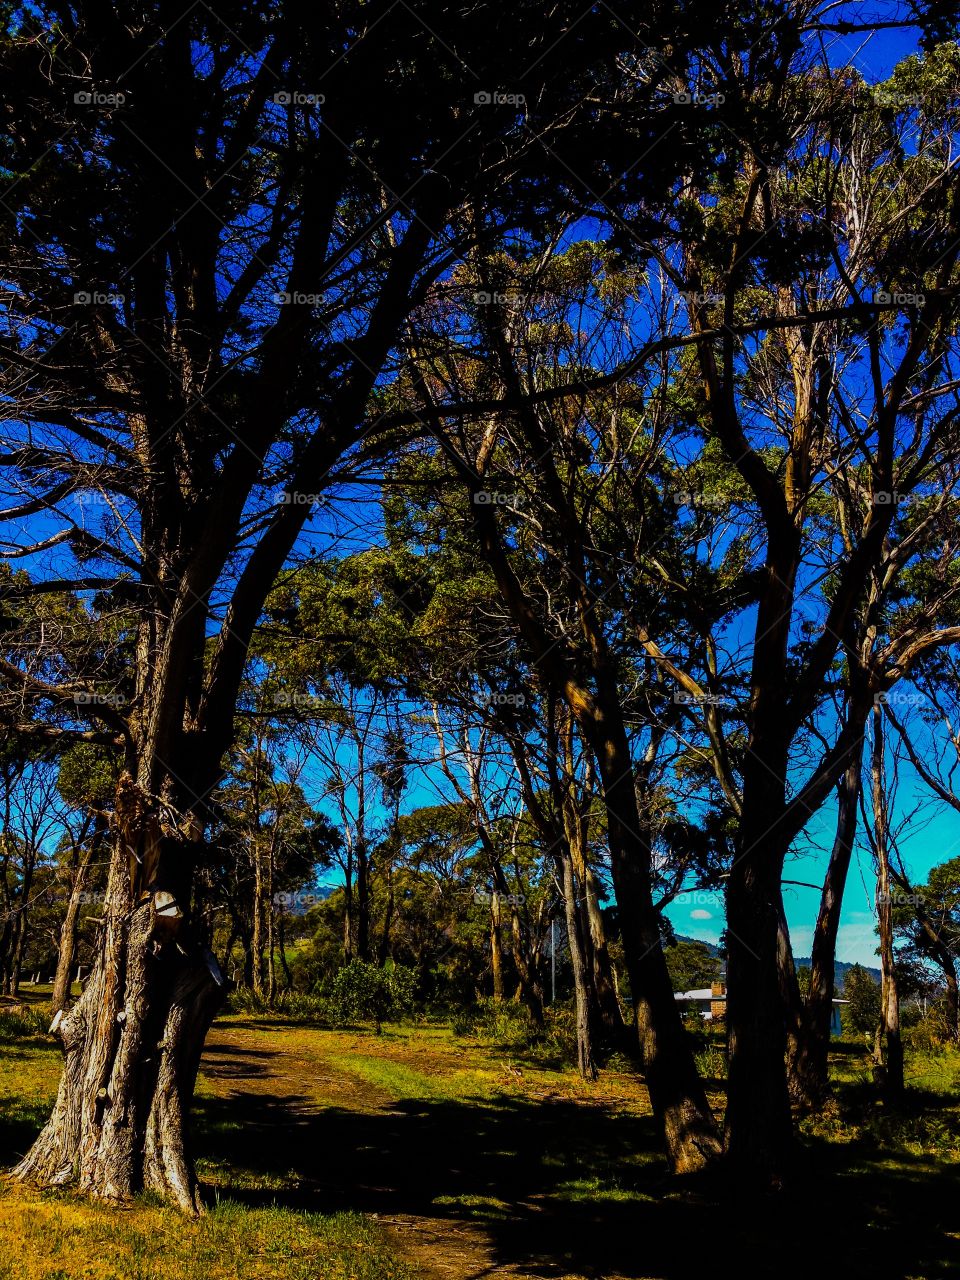 Walk under the trees. Pathway under the trees in bruny island, tasmania